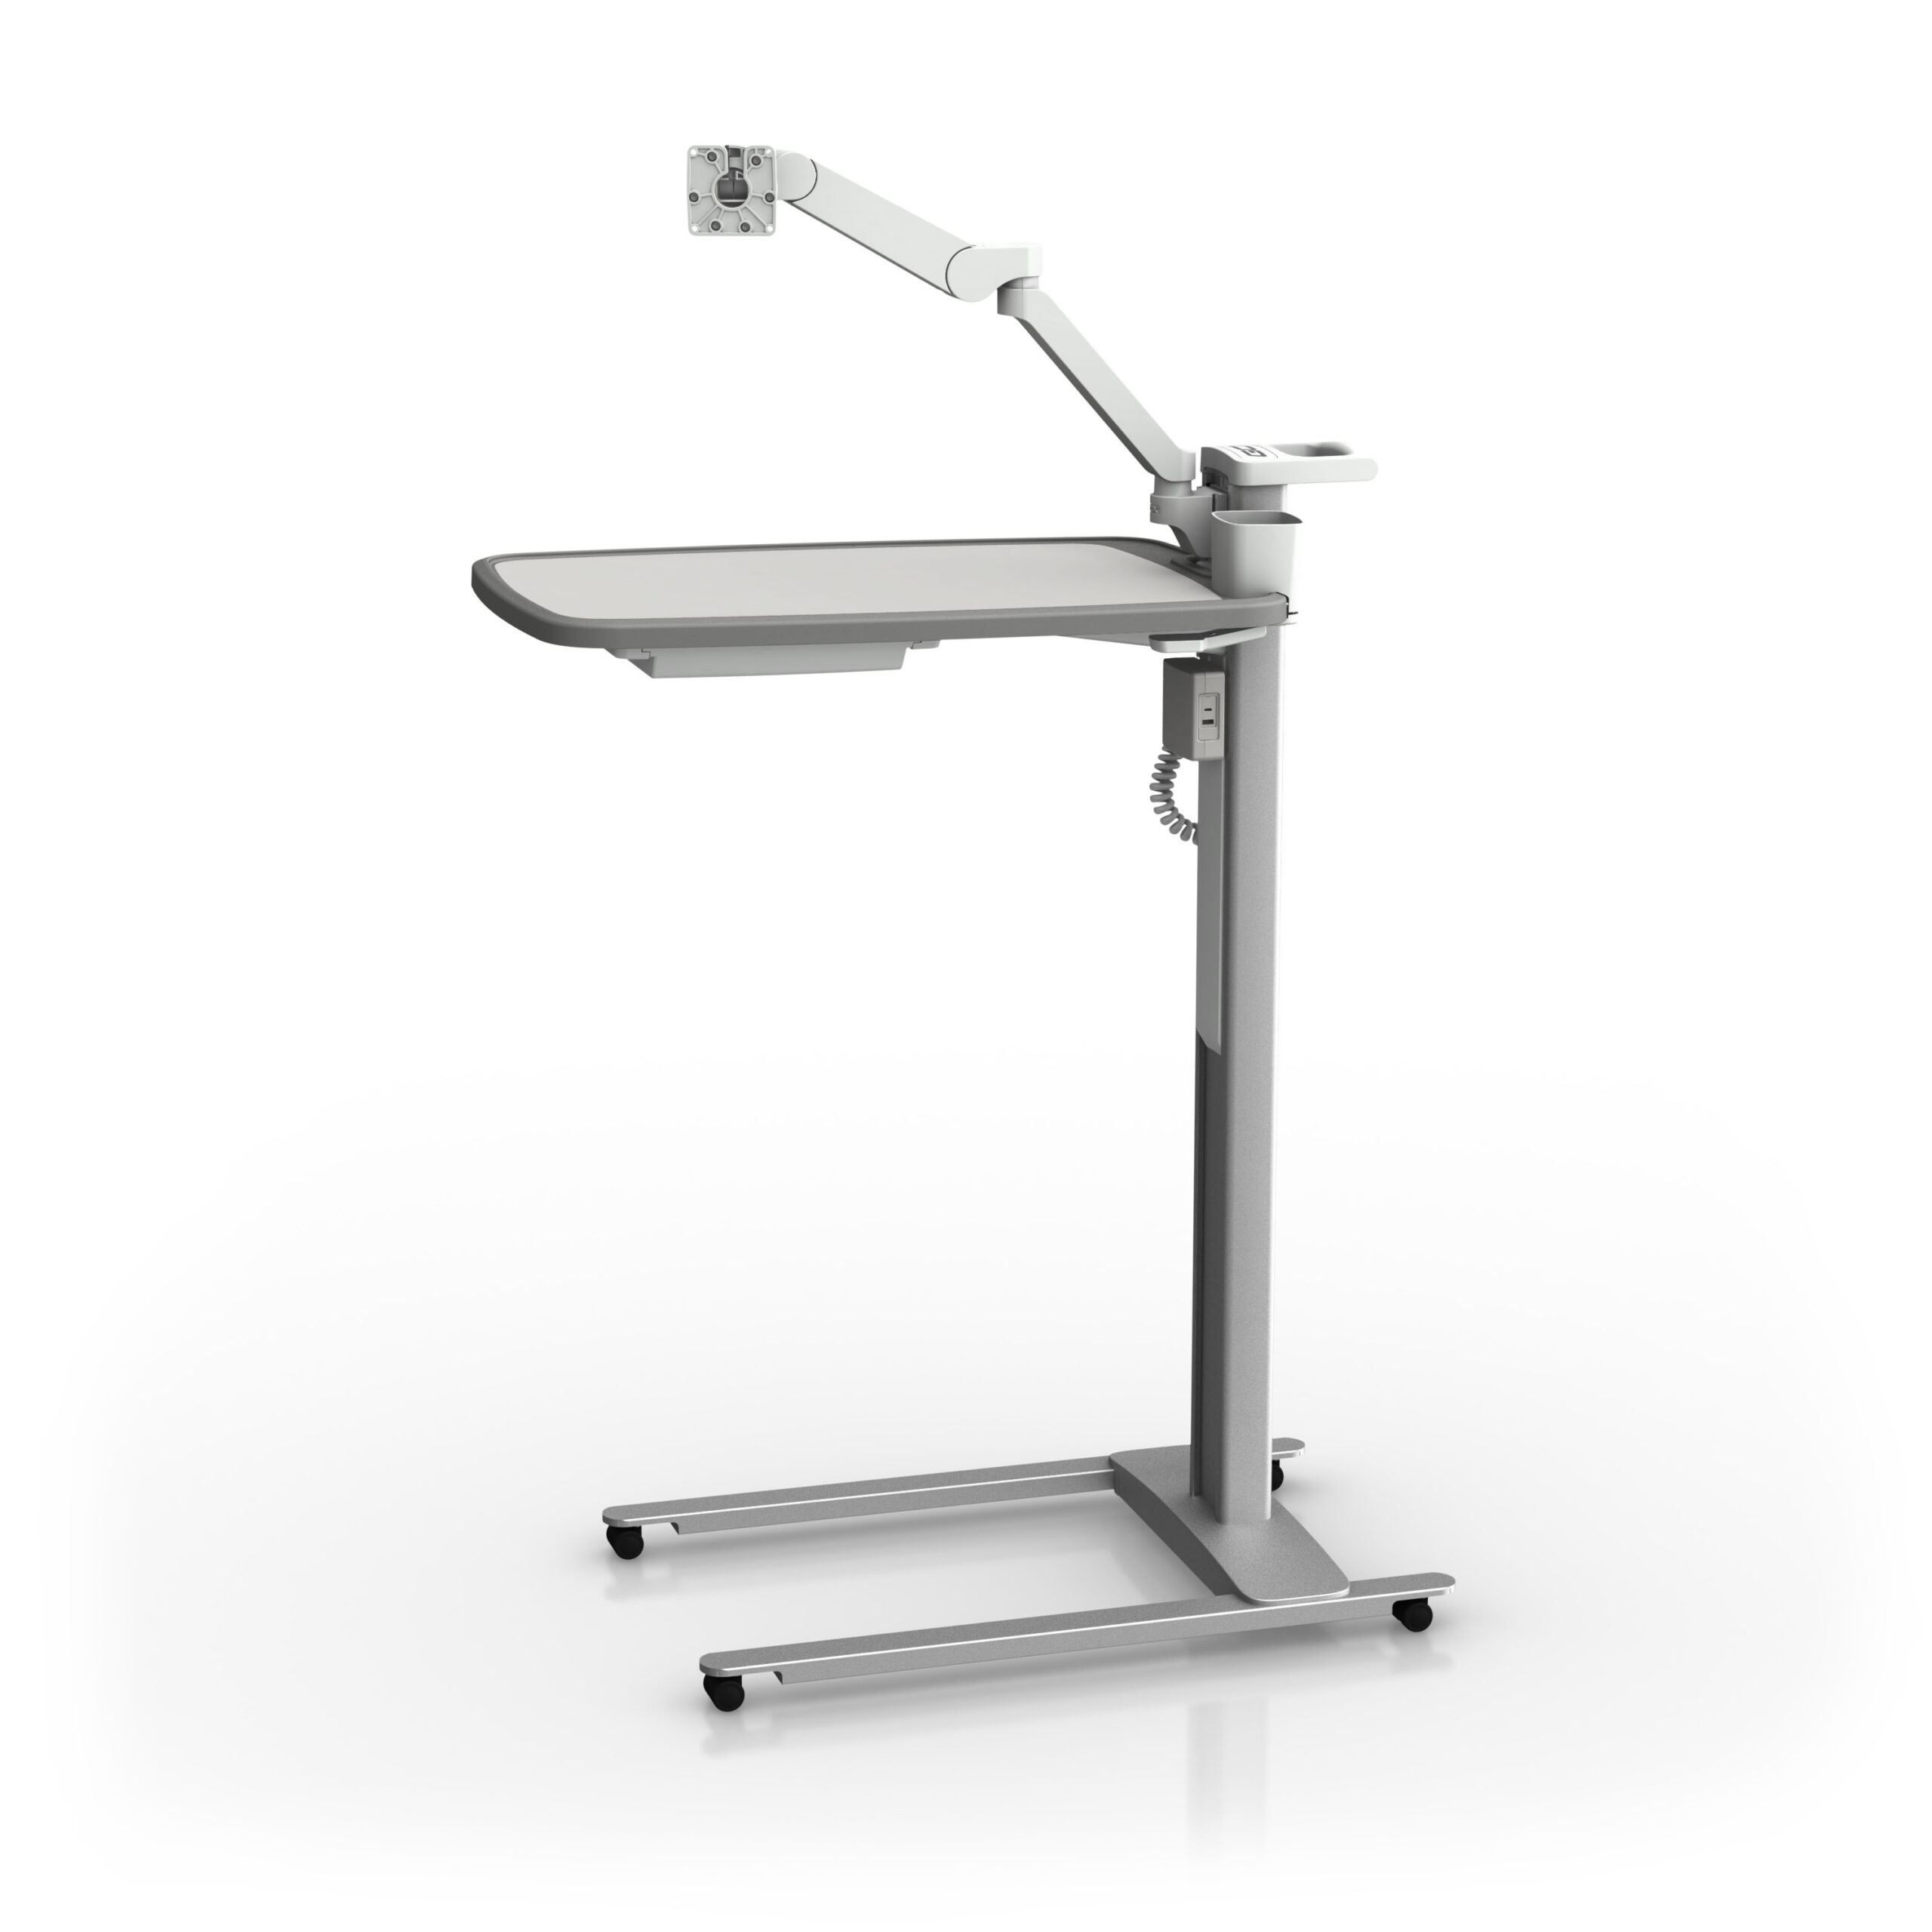 OBT-0011-61-02-43 - OBT-0011-61-02-43 – Folkstone Gray Patient Engagement Overbed Table with PRO-ADJUST™ Tablet Arm